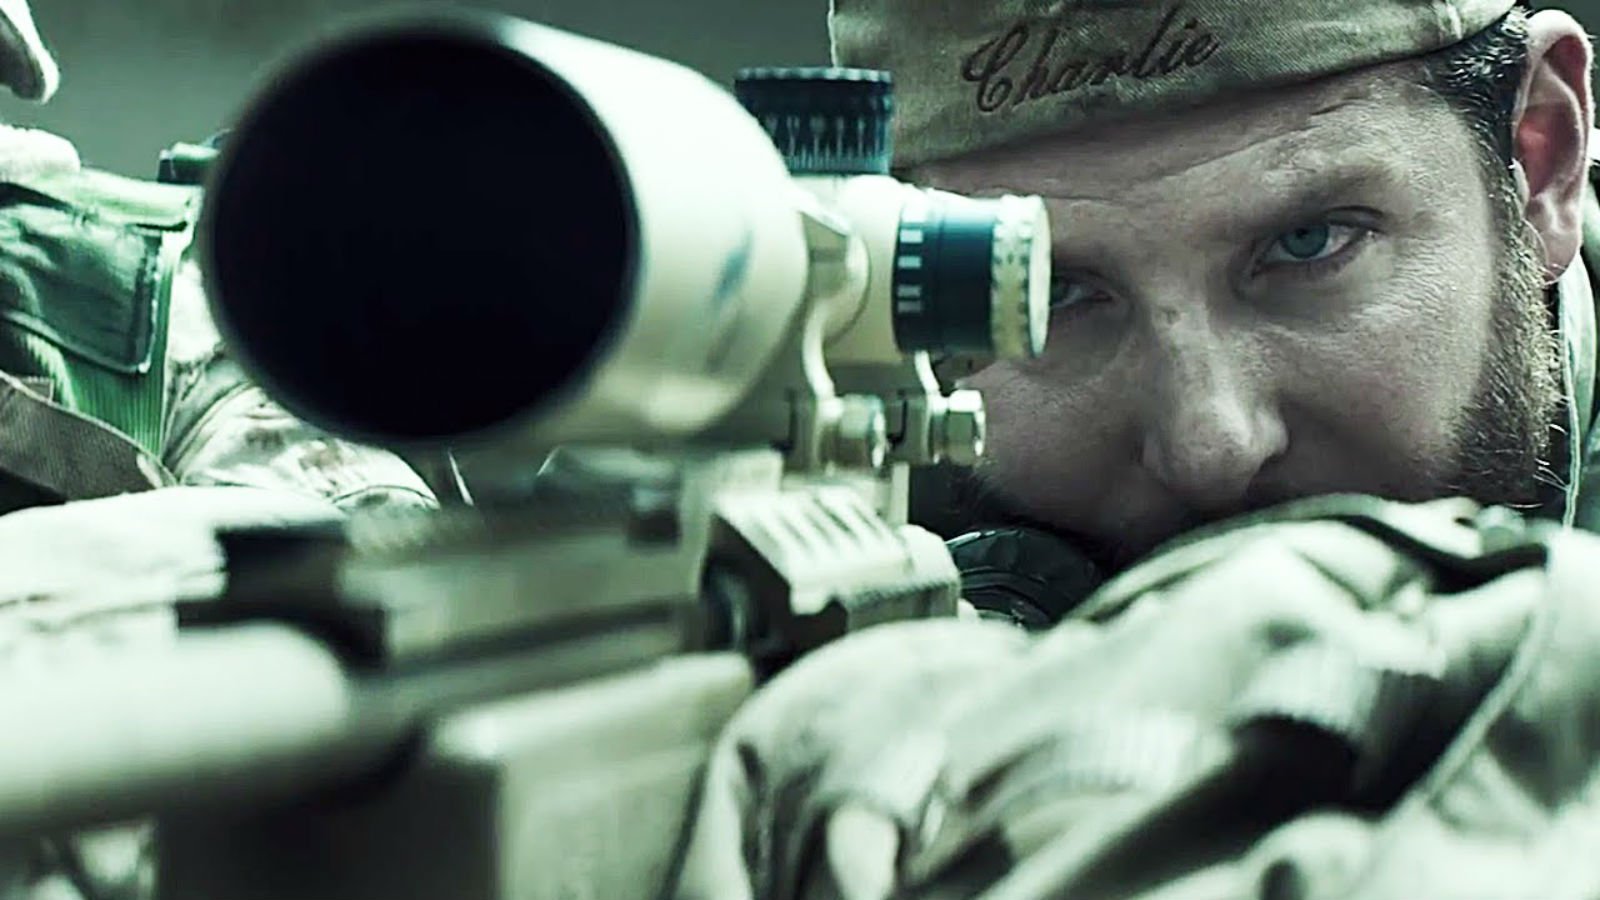 american, Sniper, Biography, Military, War, Fighting, Navy, Seal, Action, Clint, Eastwood, 1americansniper, Weapon, Gun Wallpaper